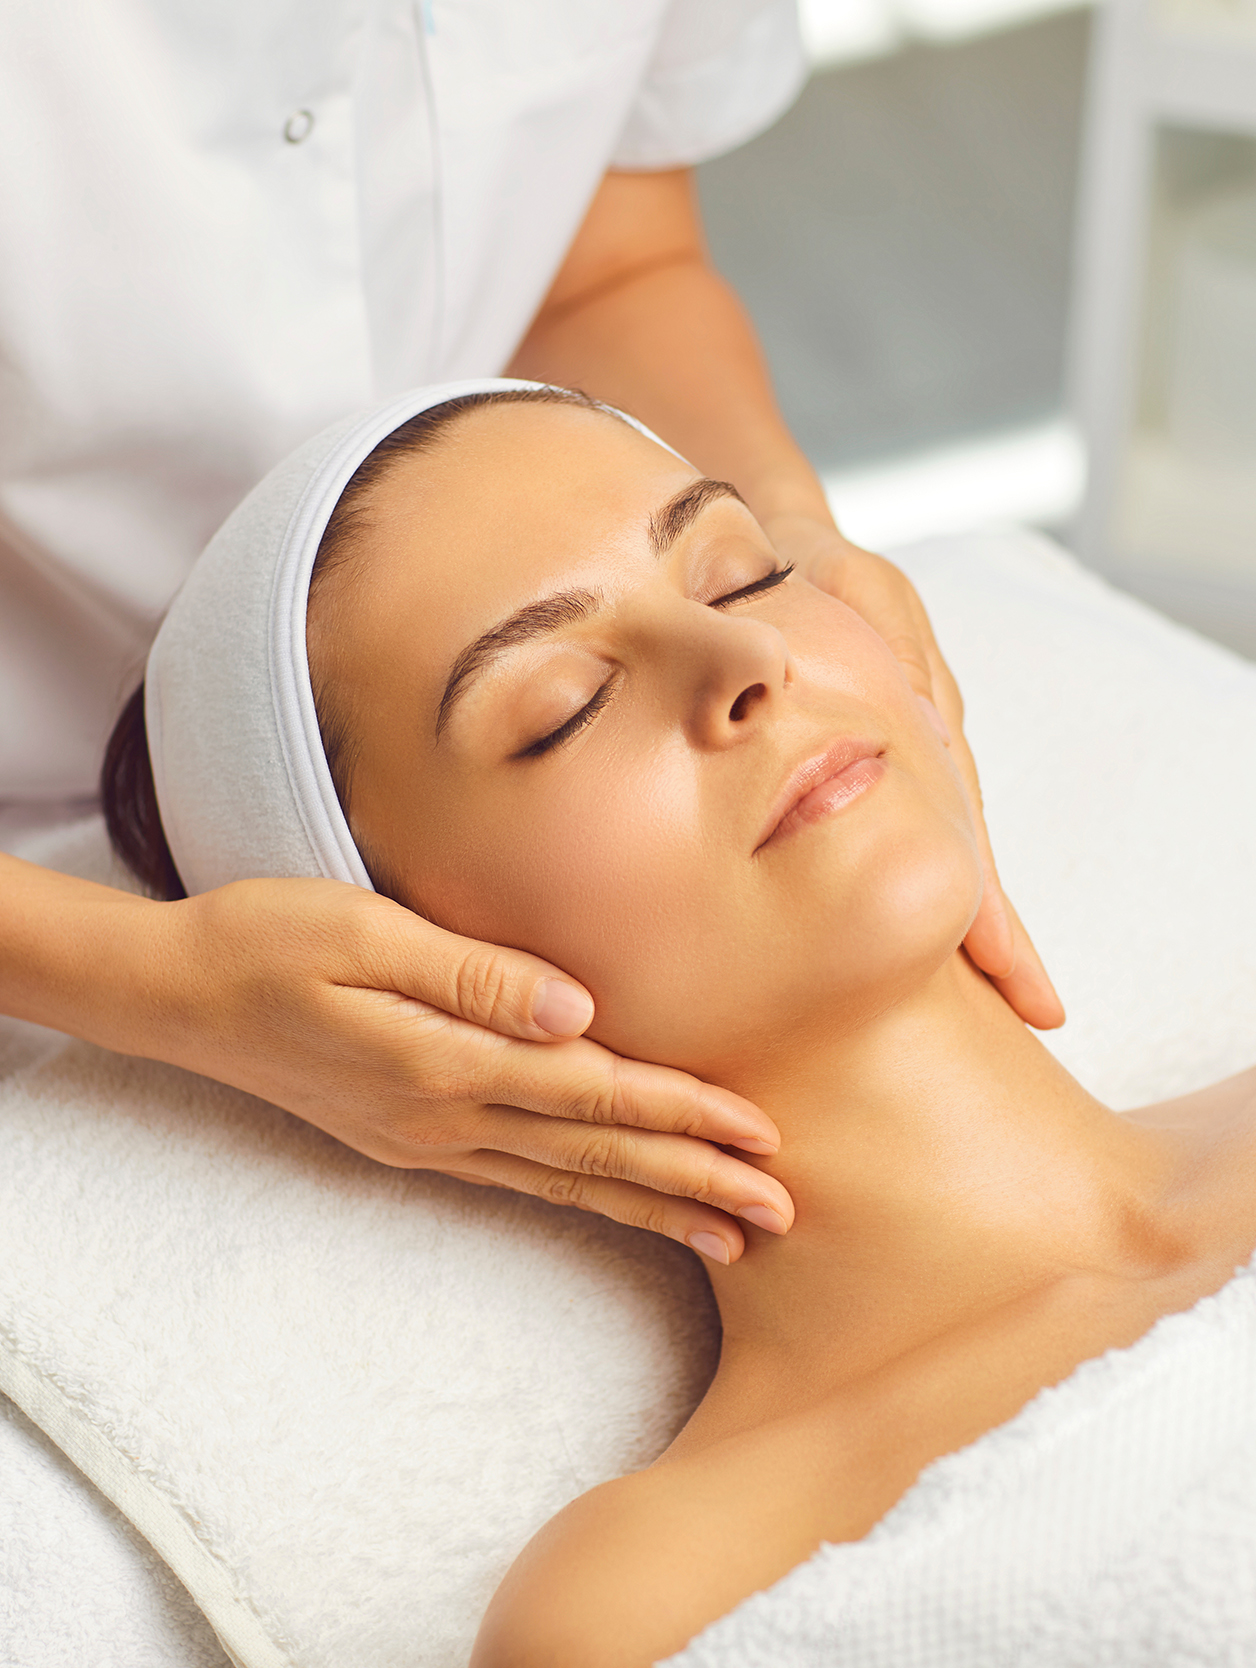 Hands of cosmetologist making manual relaxing rejuvenating facial massage for young woman